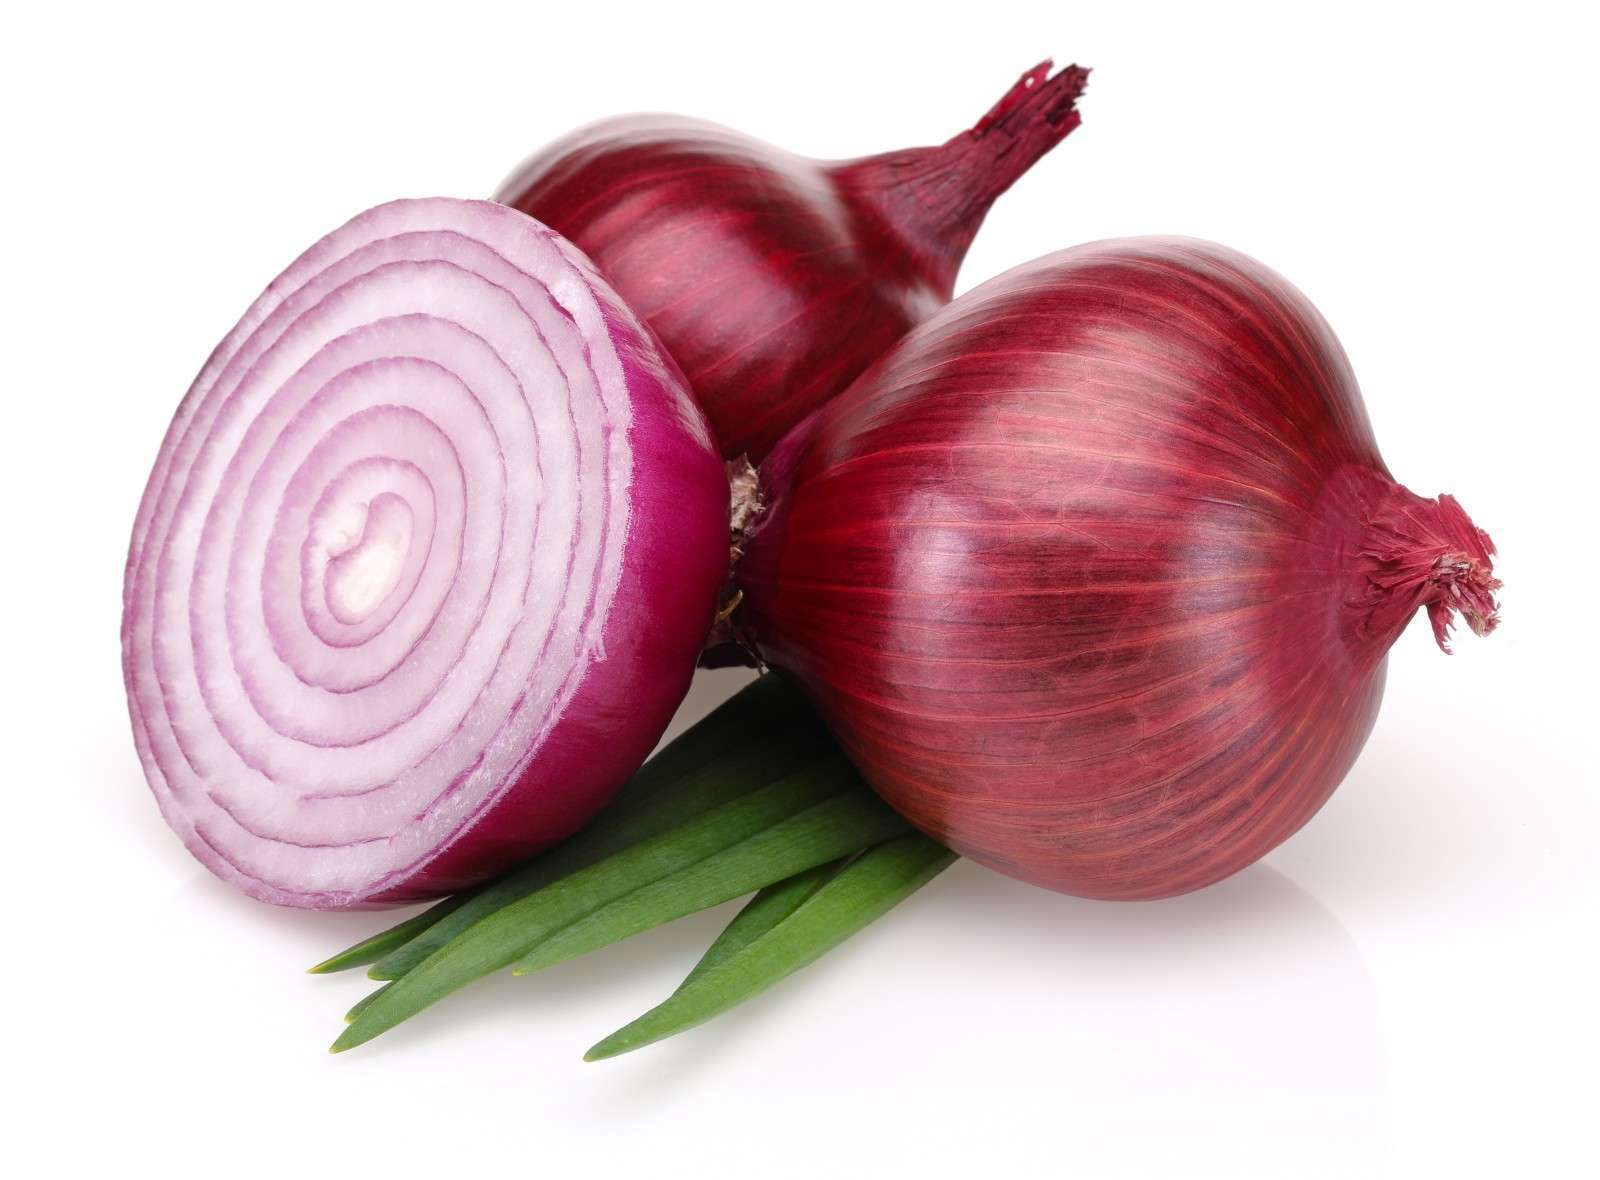 Image result for onion